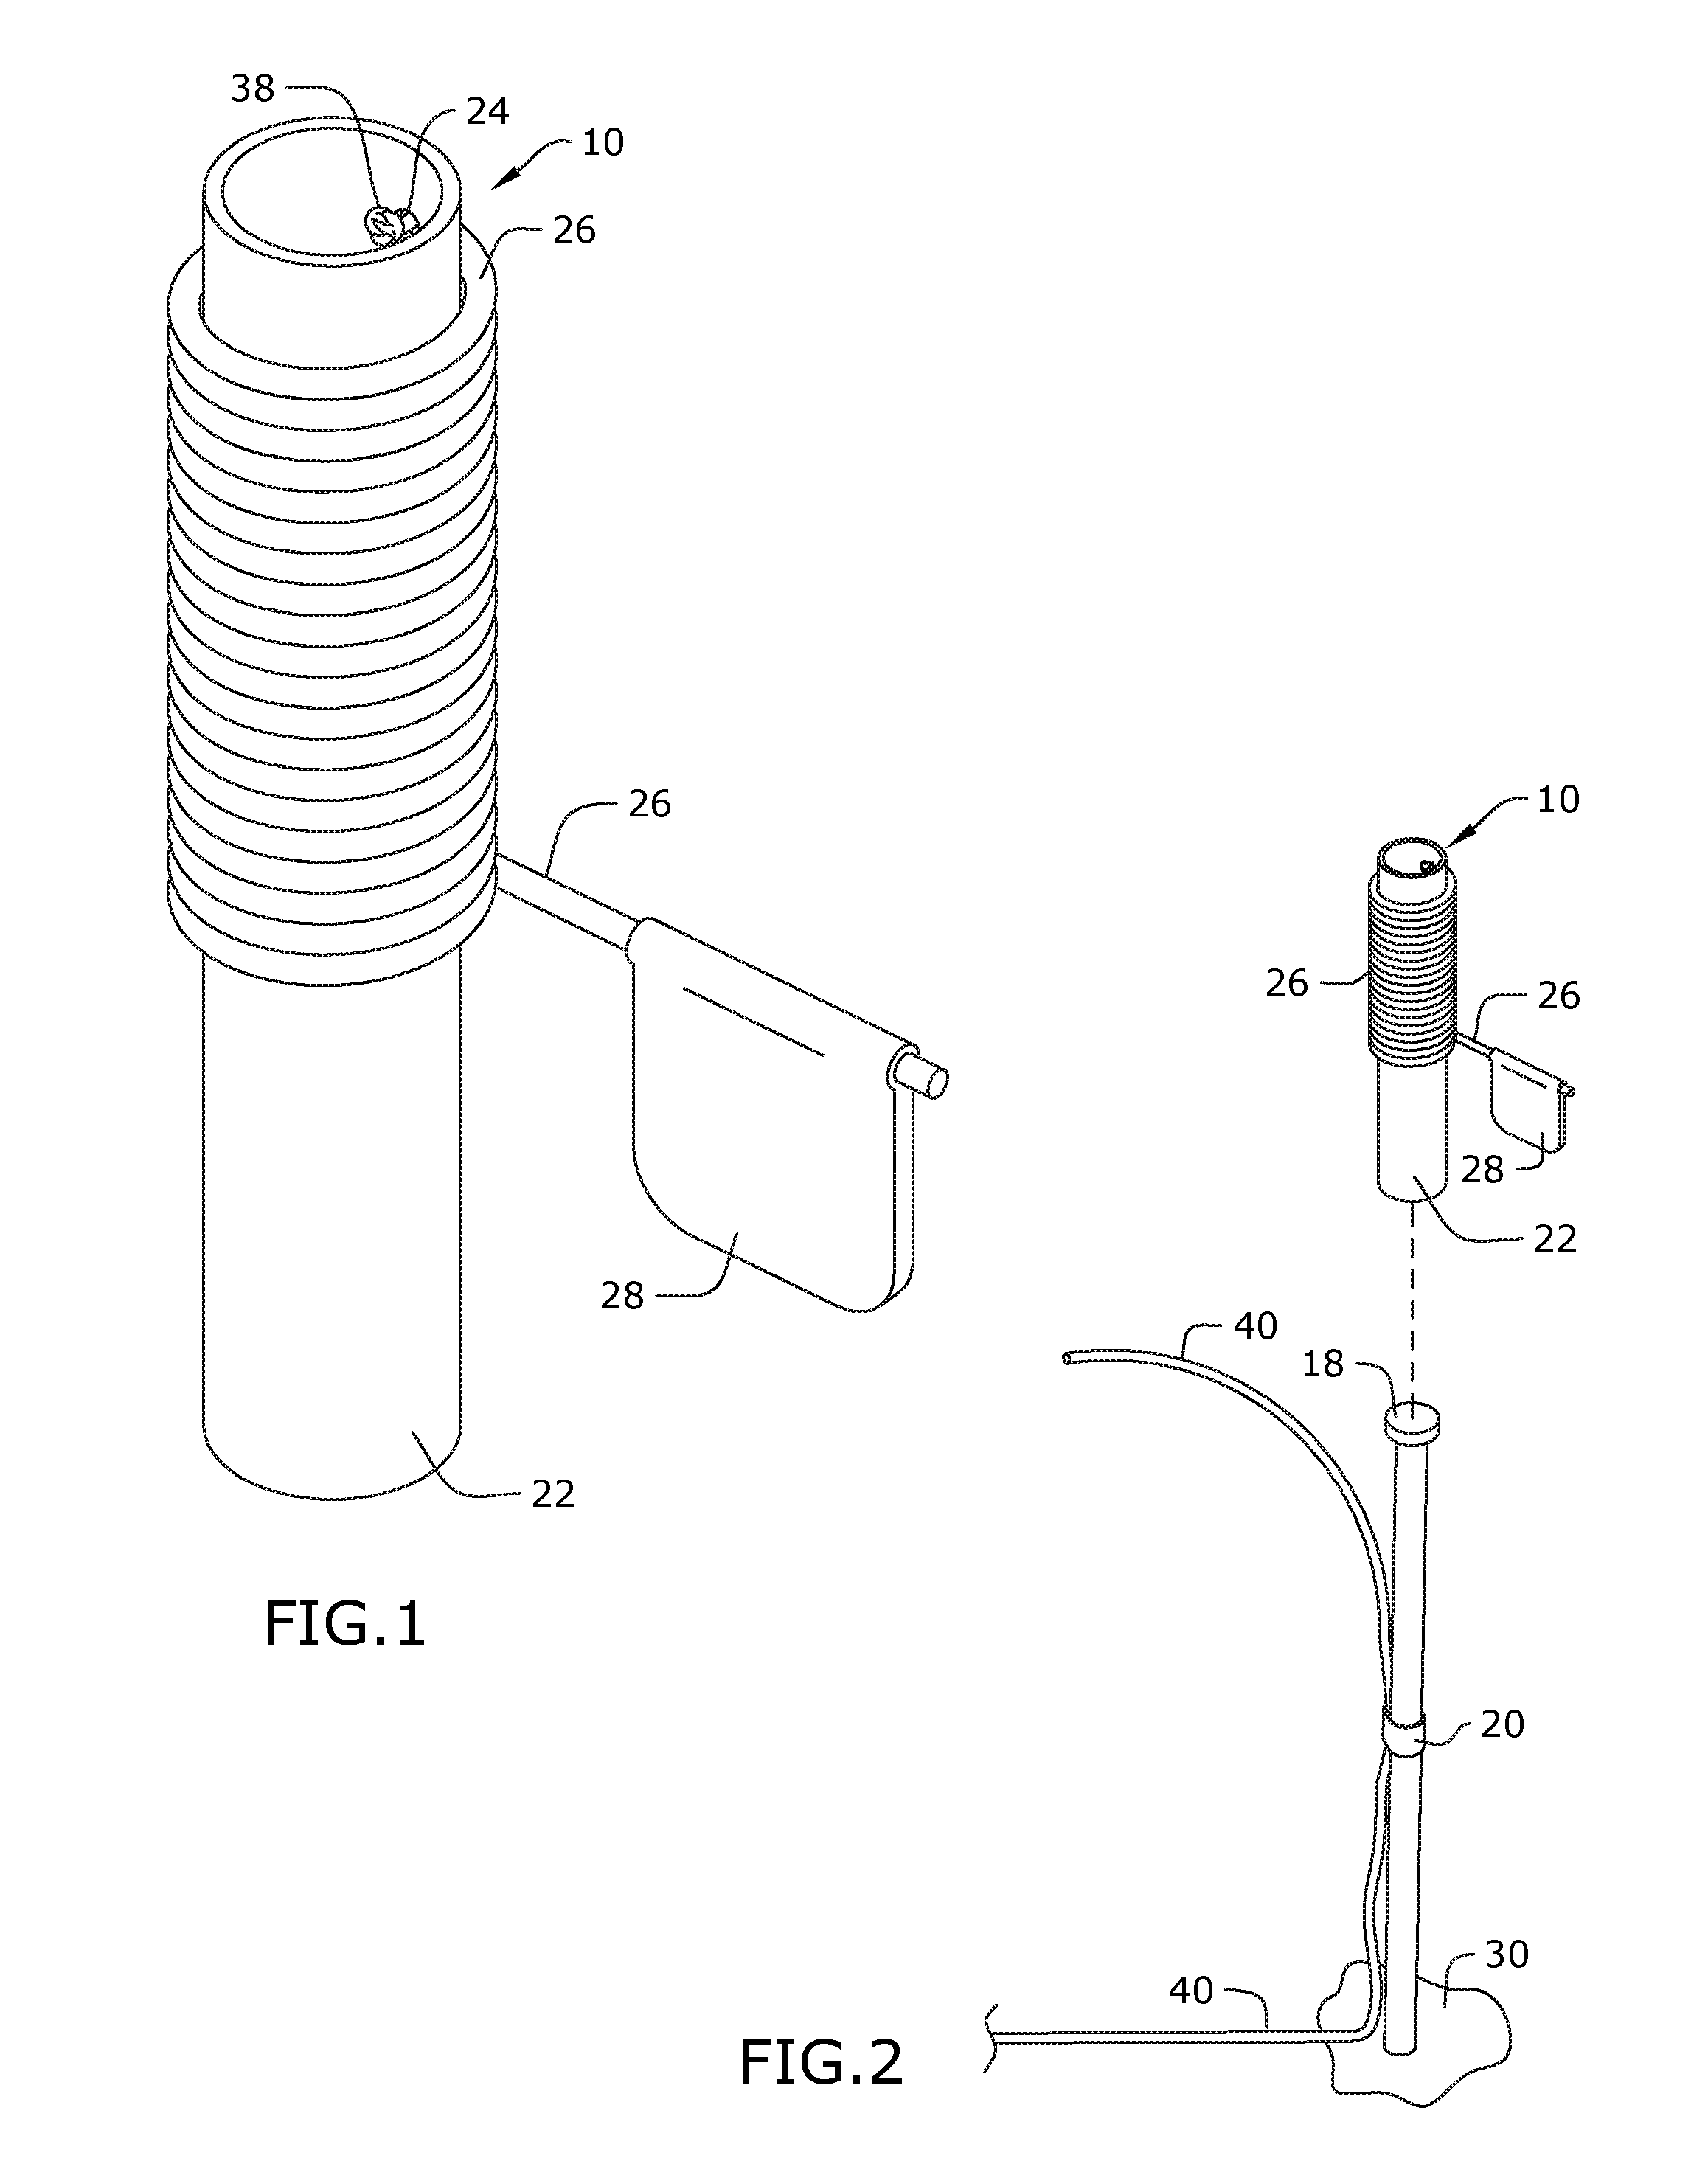 System of illuminating poured surfaces